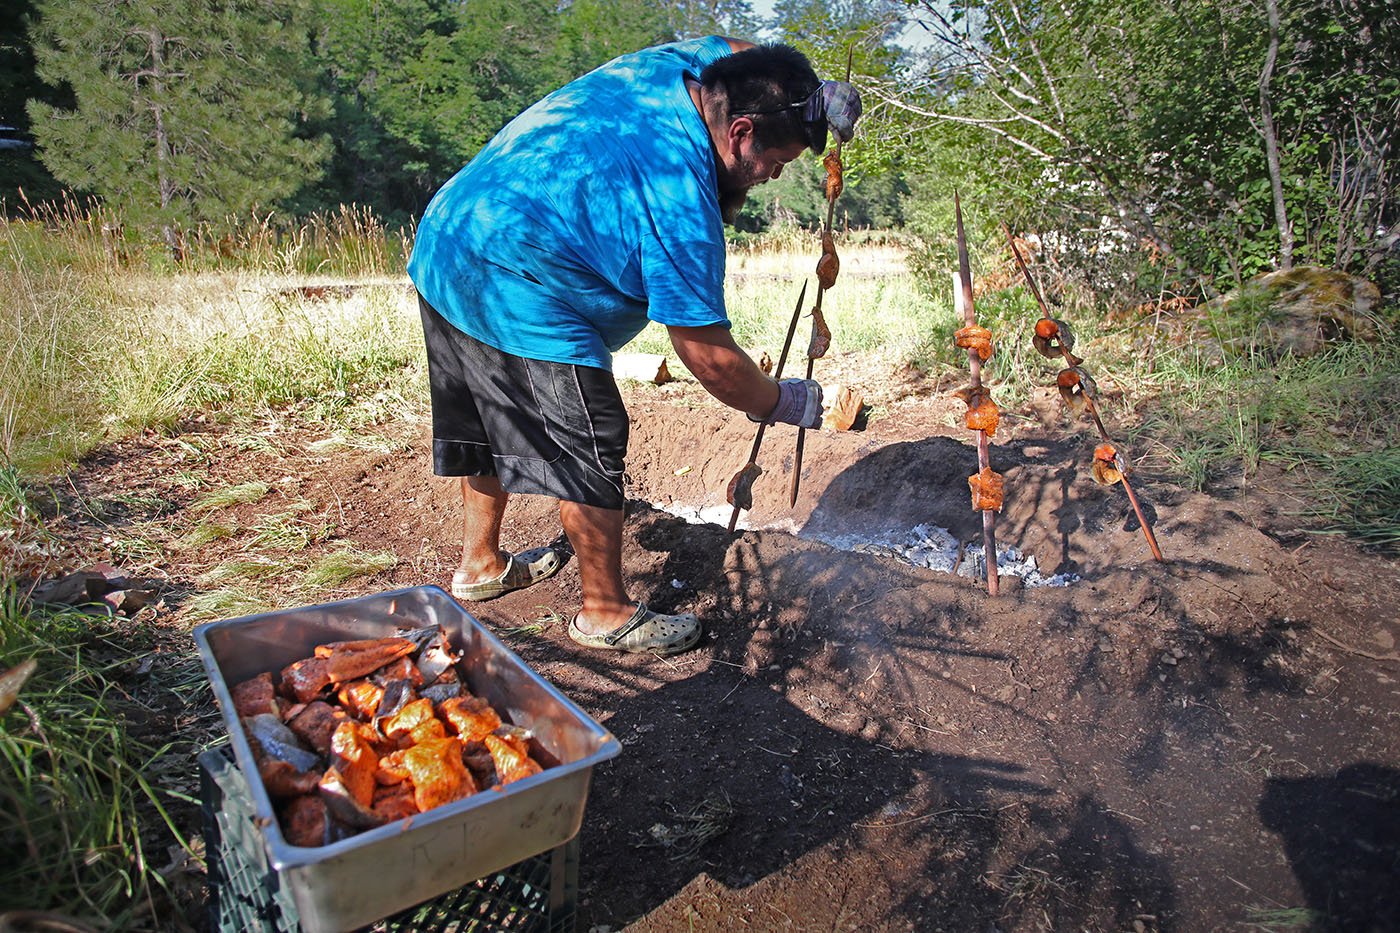  Shasta-Trinity National Forest — Kyle Brown (Hupa) prepares salmon brought from the Hoopa Valley Reservation over a fire. July 11, 2022. Tom Levy/The Spiritual Edge 